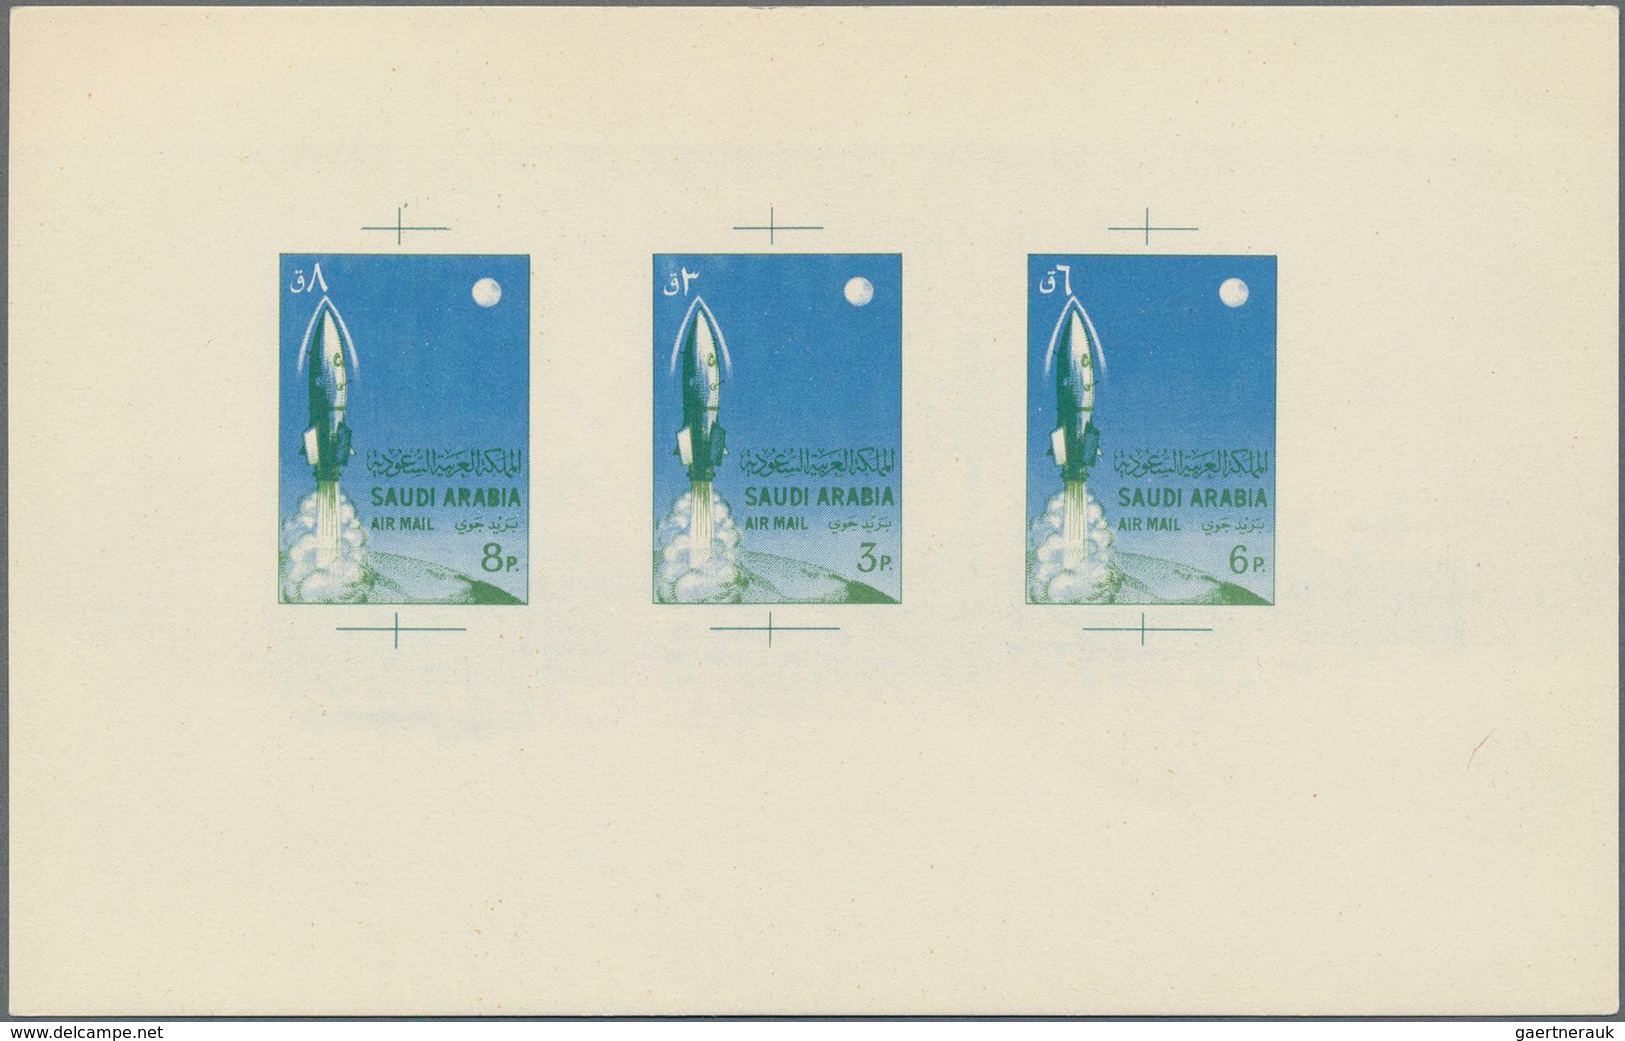 Saudi-Arabien: 1960's Unissued 'Rocket' airmail stamps: Trial and colour proofs of unissued 3p., 6p.